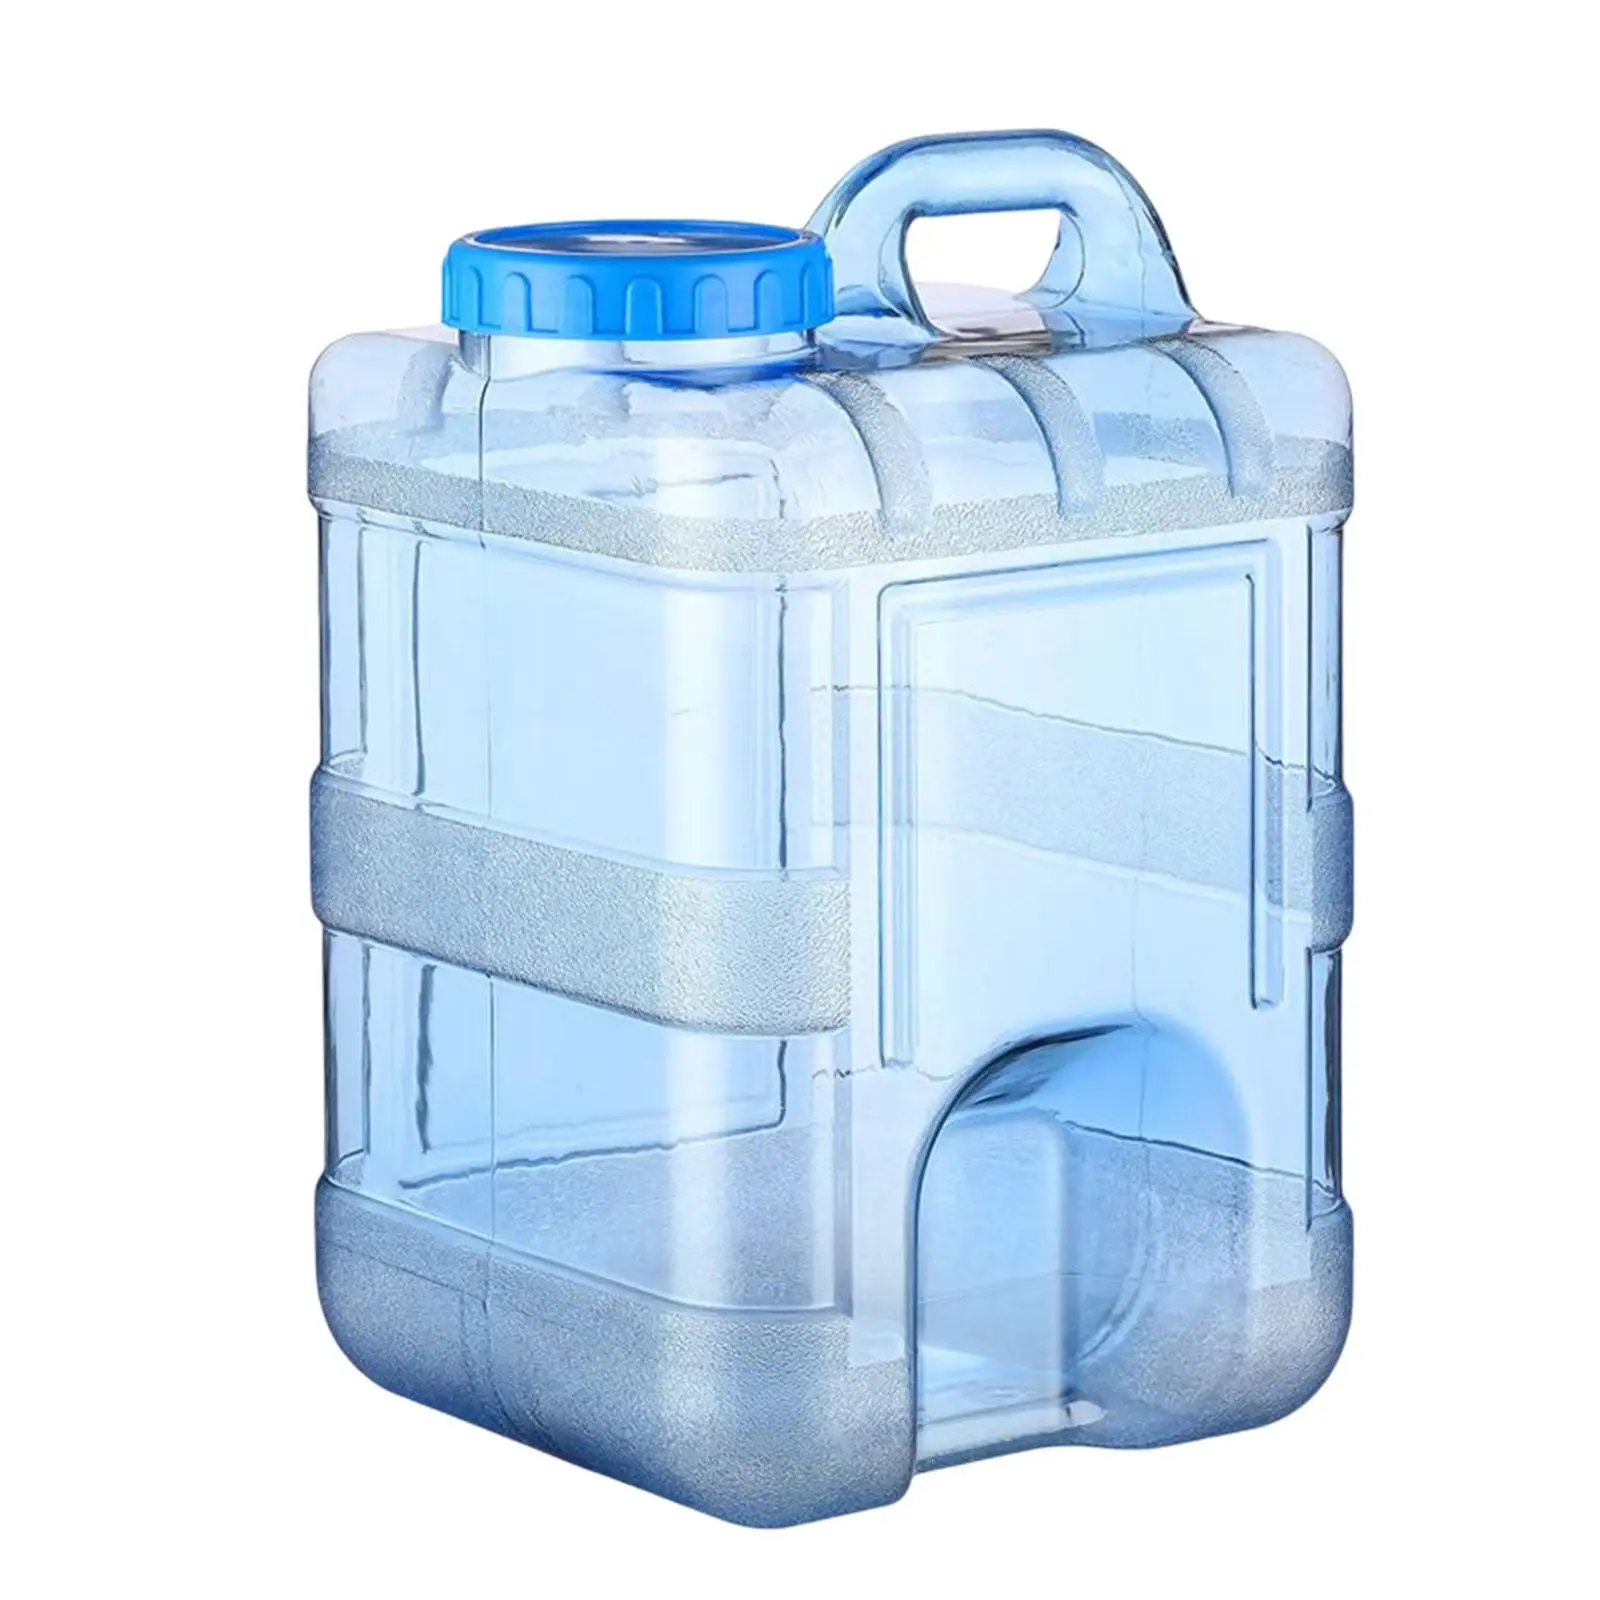 

15L Transparent Blue Portable Water Storage Barrel Container for Washing Hands and Drinking Water Easily Clean Compact Water Jug